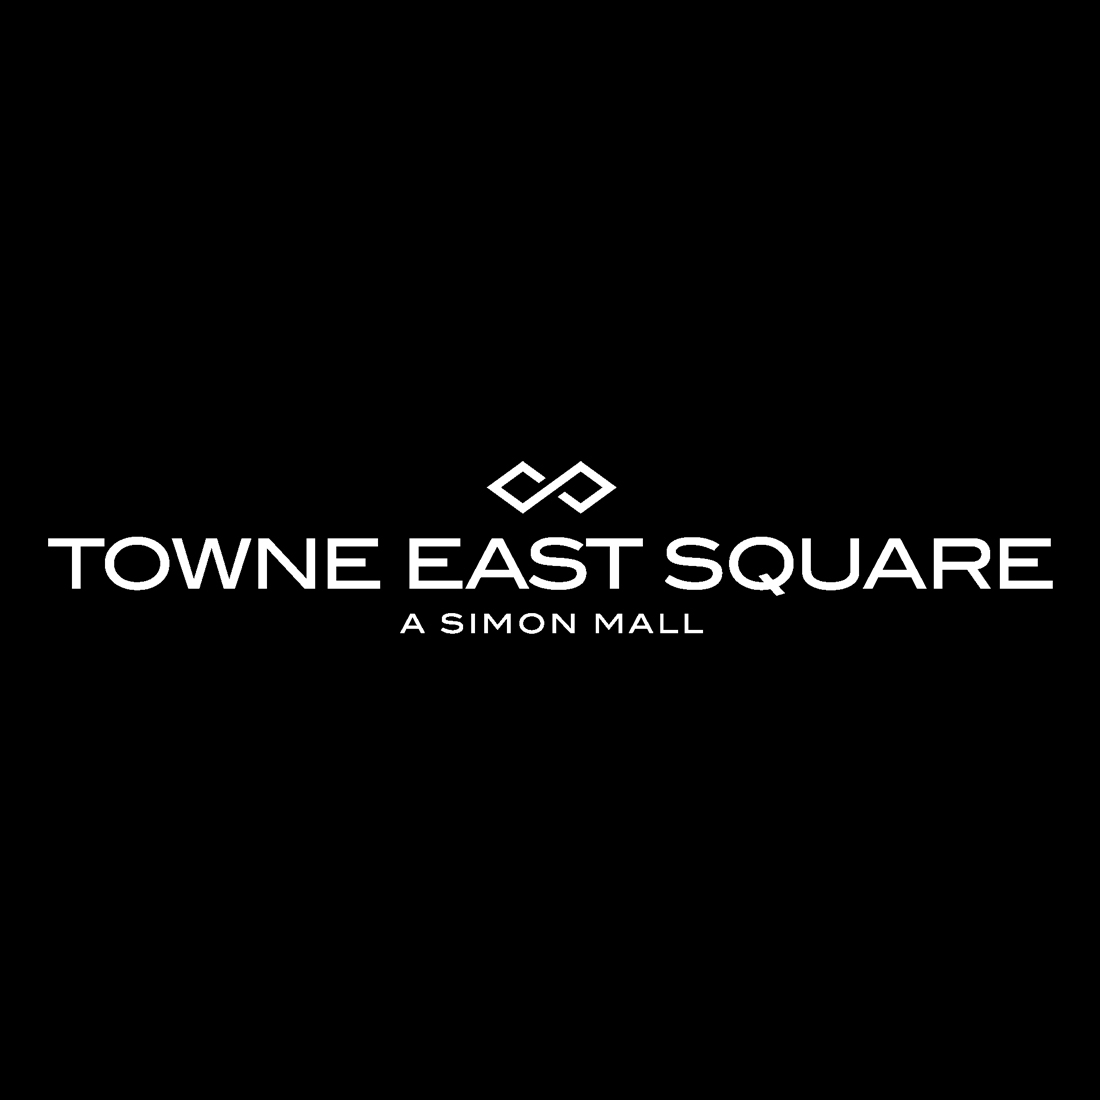 Towne East Square